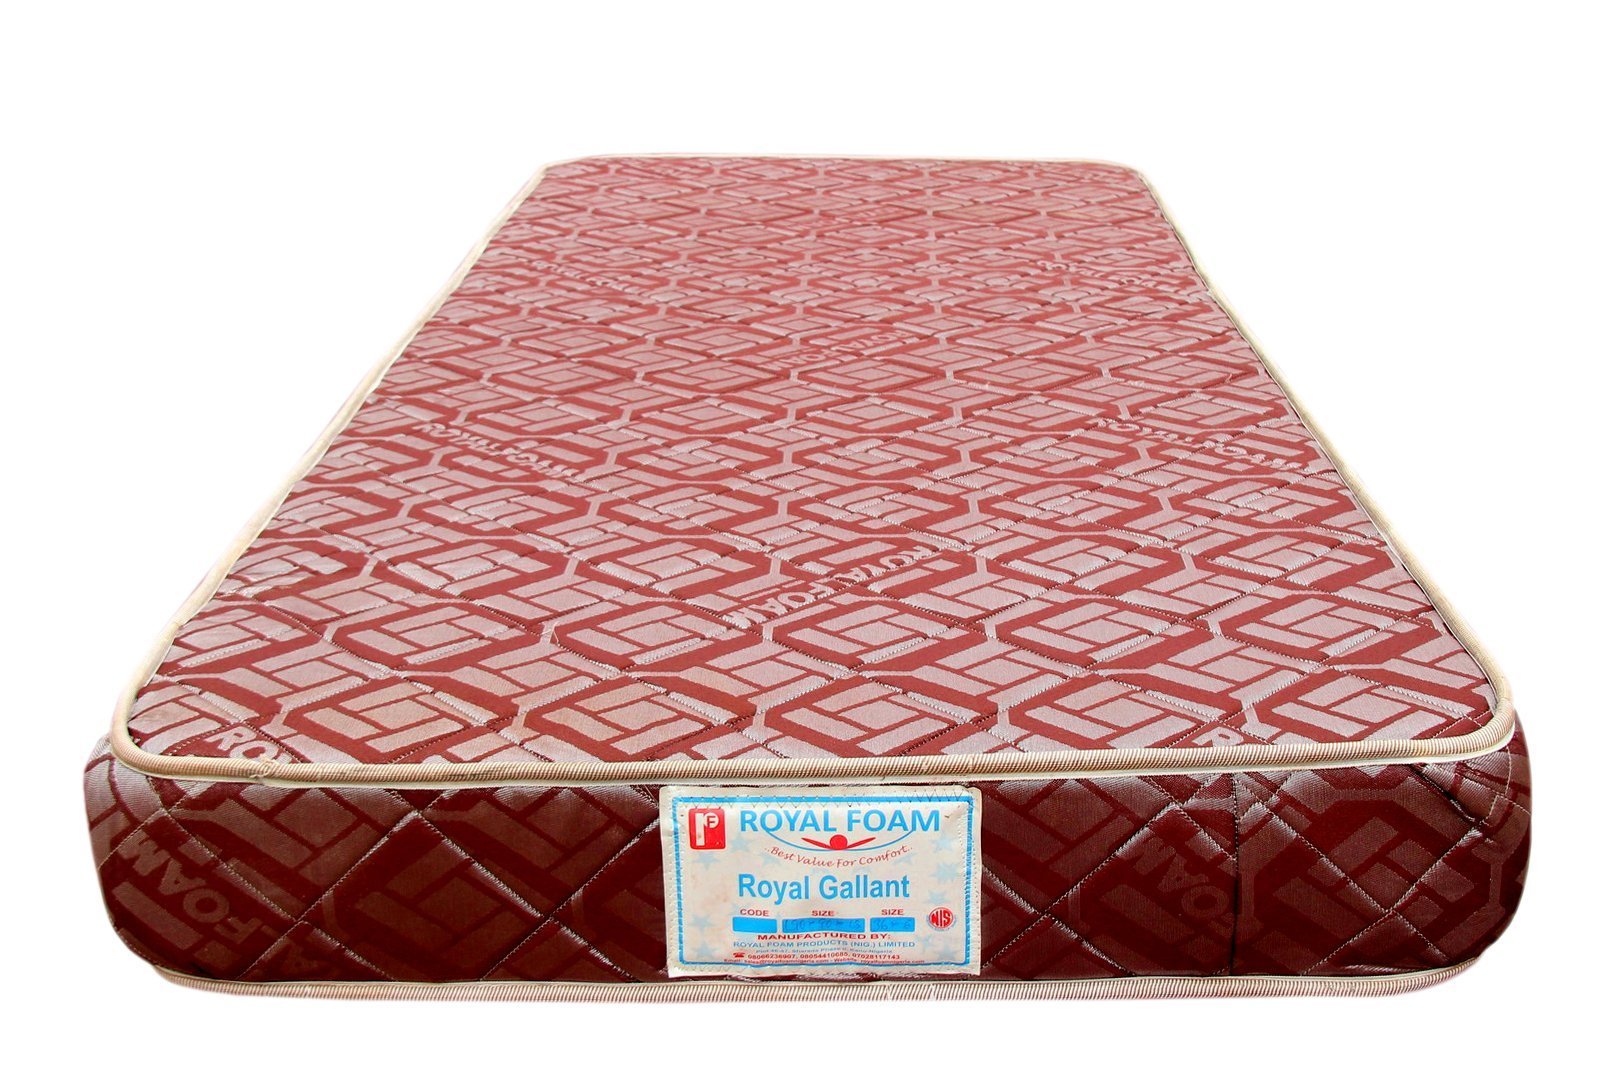 Royal Gallant Plus JACQUARD fabric-Fully Quilted Mattress 190 X 210 X 25 CM(6ft x 7ft x 10inches) 2 Adult (King Size)(Lagos Only)